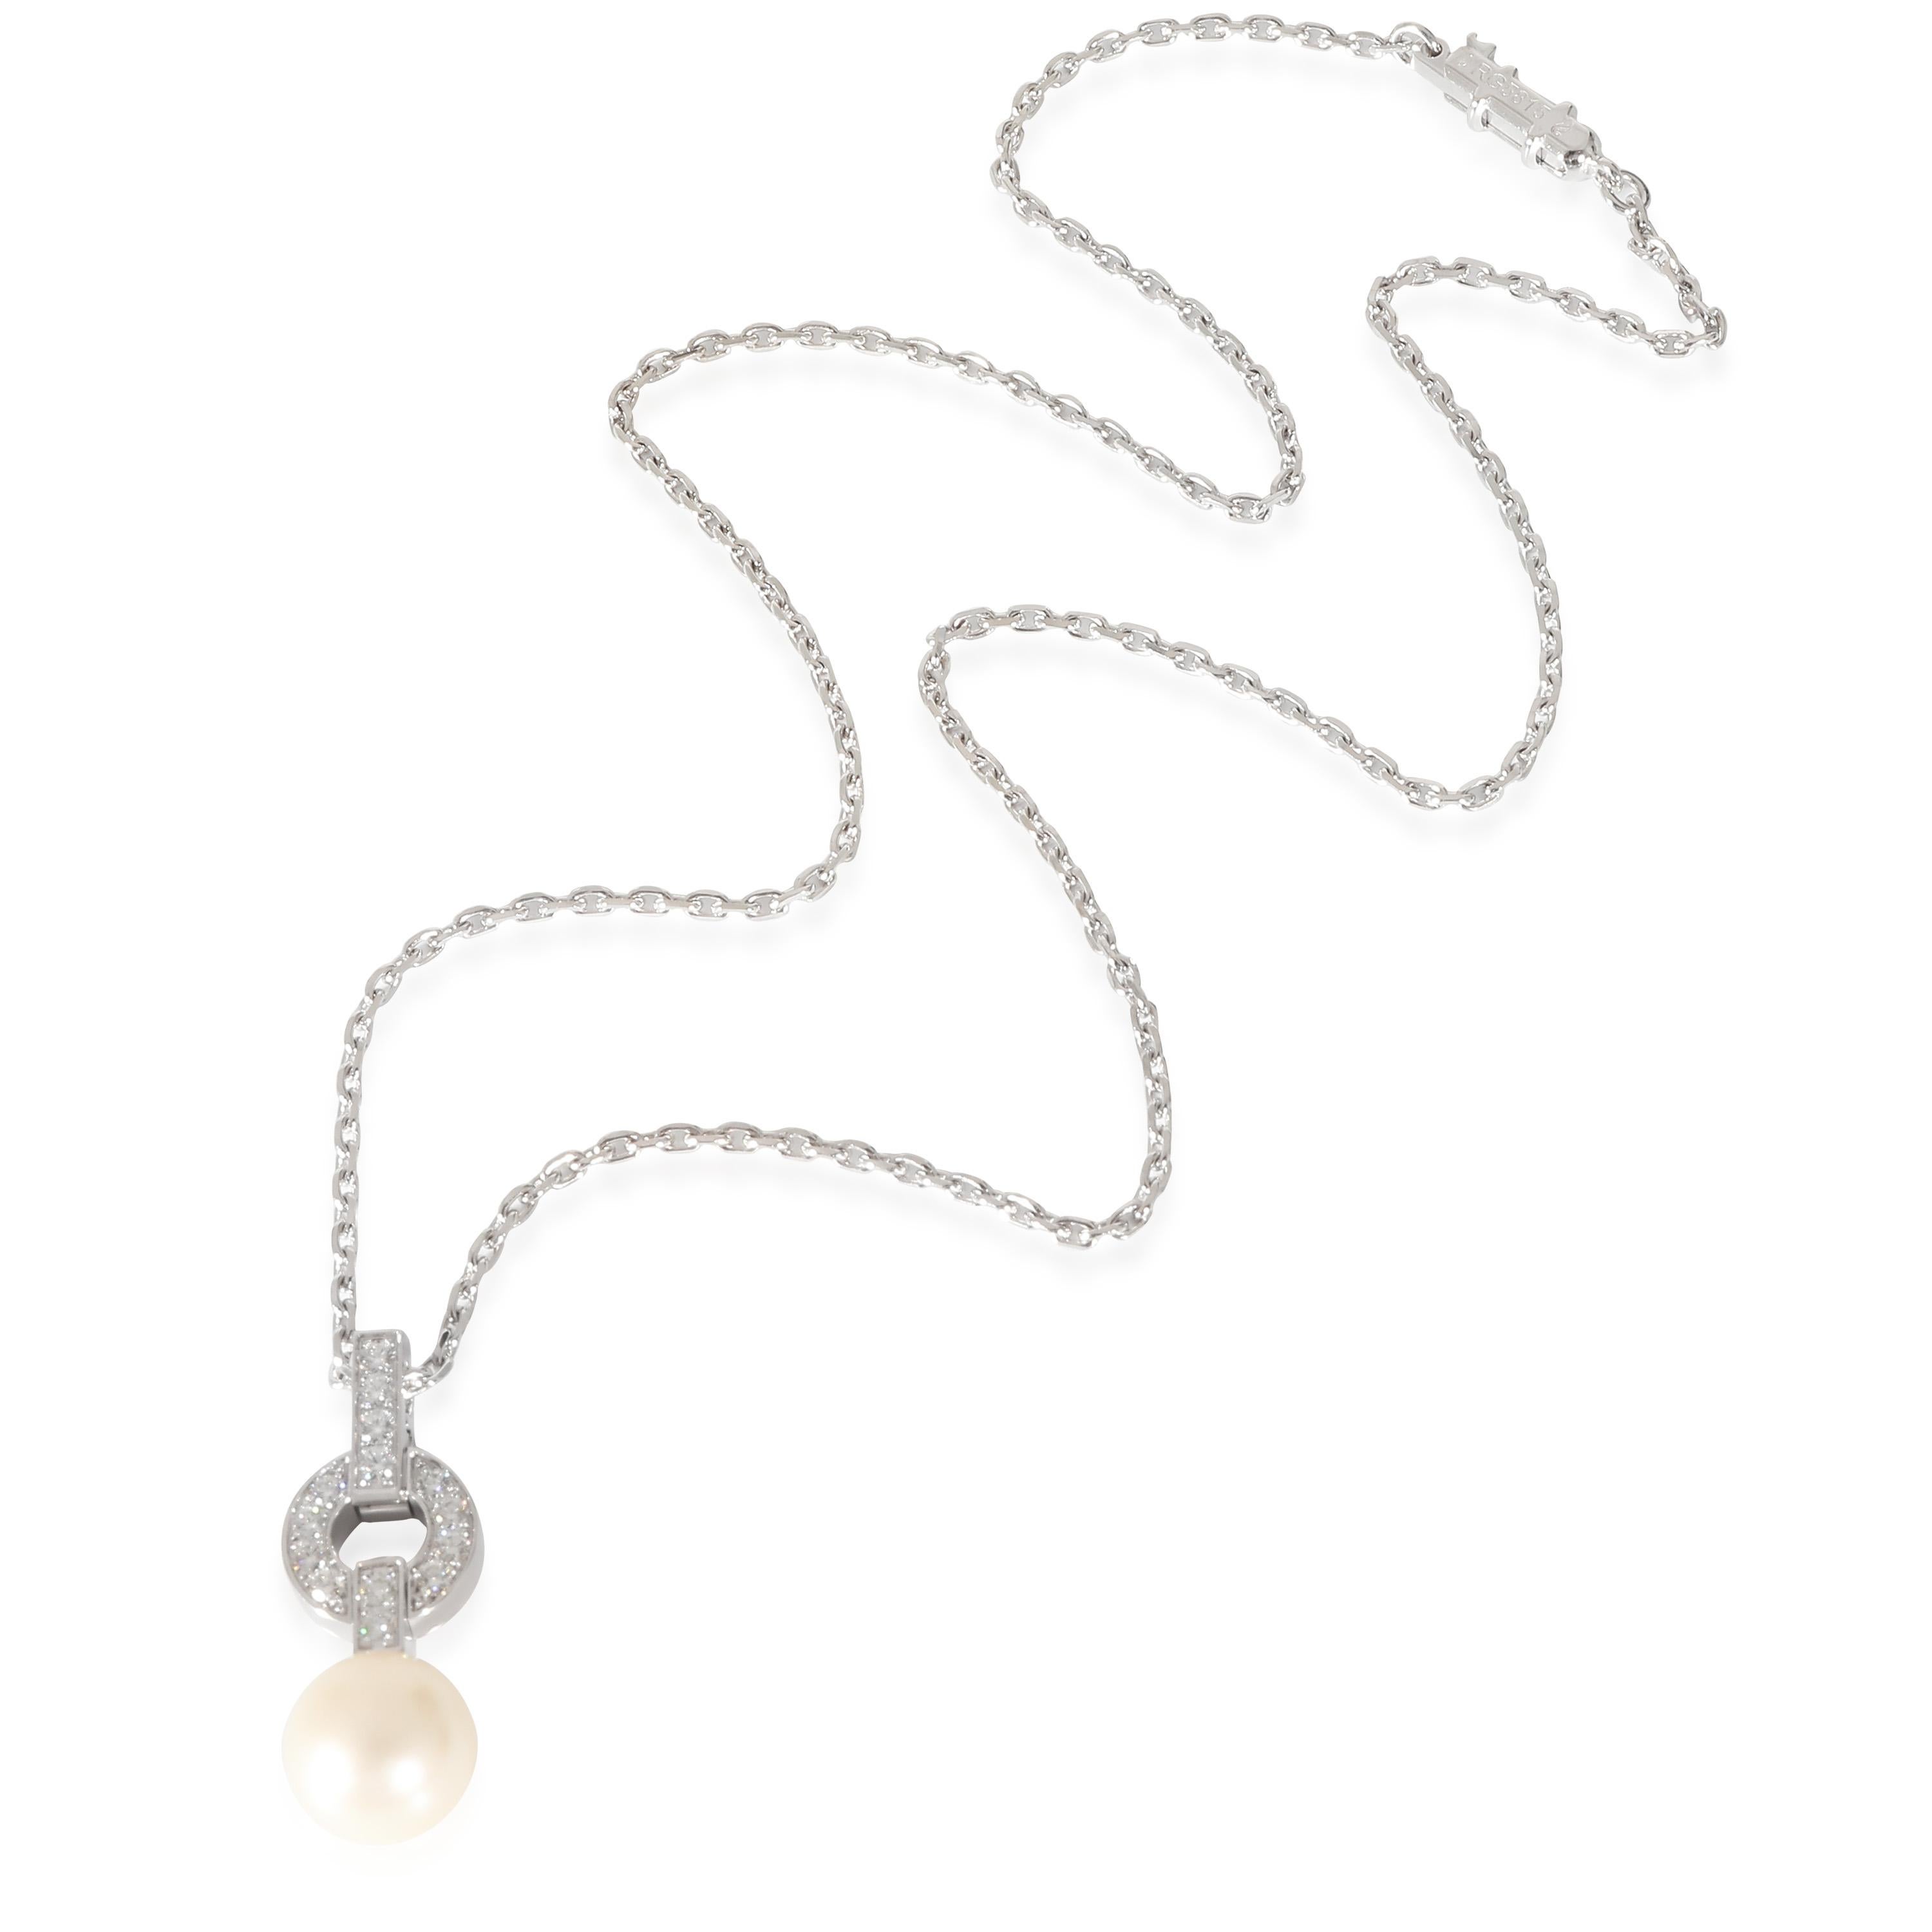 Cartier Himalia Pearl Pendant in 18K White Gold 0.25 CTW

PRIMARY DETAILS
SKU: 133200
Listing Title: Cartier Himalia Pearl Pendant in 18K White Gold 0.25 CTW
Condition Description: Retails for 6400 USD. In excellent condition and recently polished.